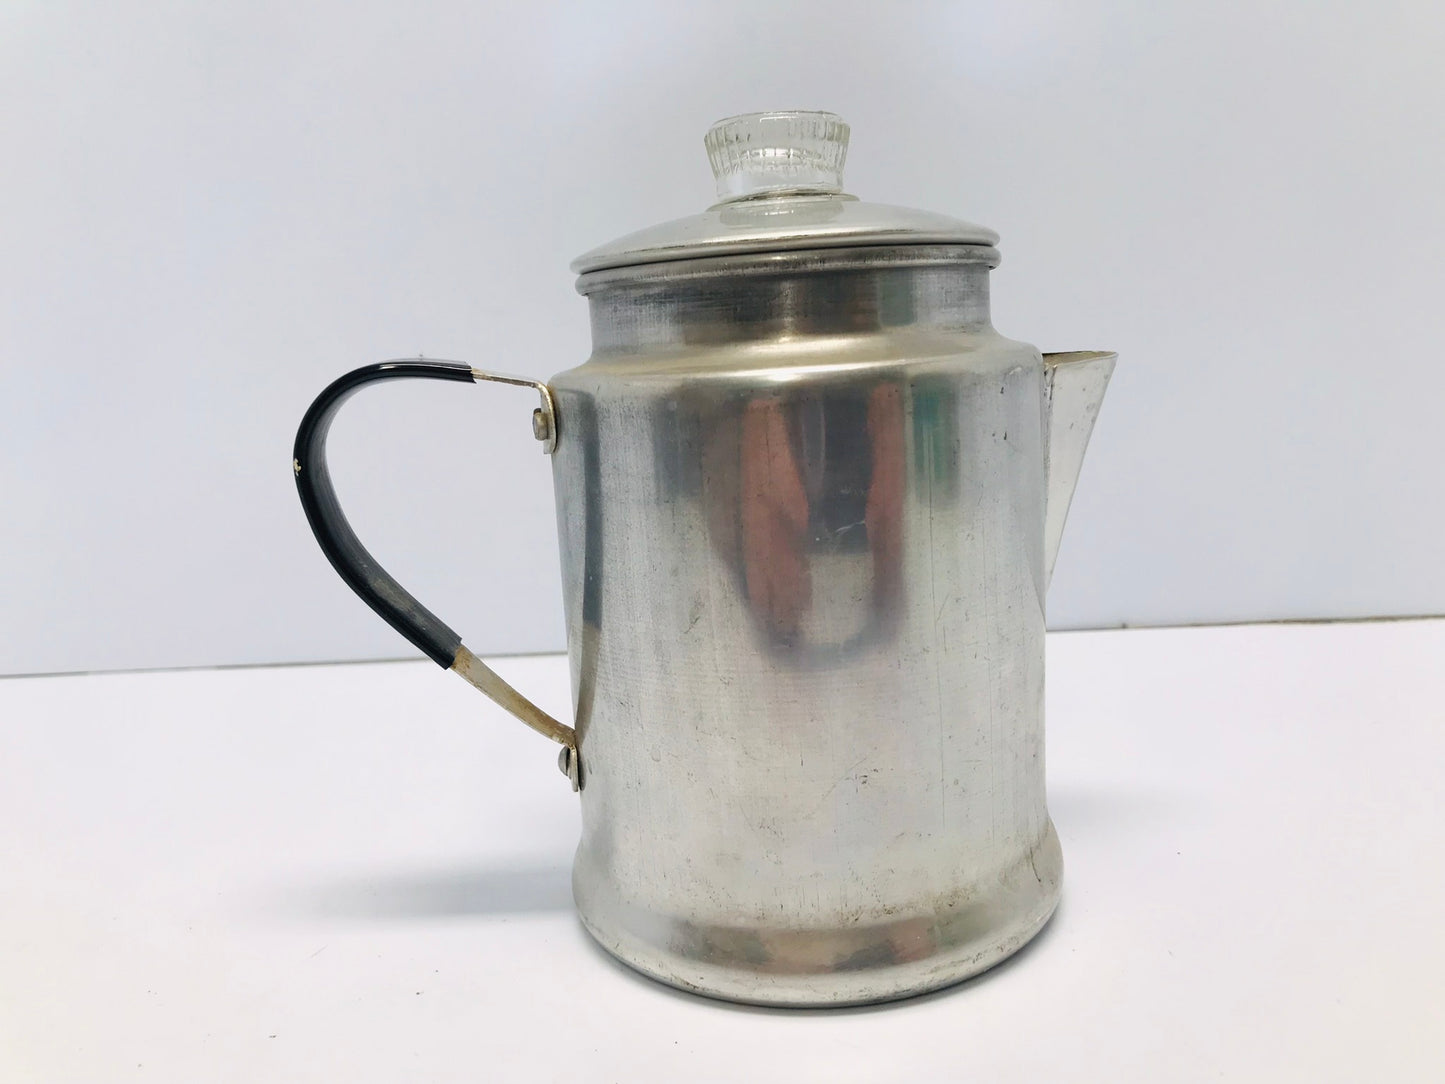 Camping Coffee Pot Perolator 2 cup Aluminum Rustproof Fast Heat Up Outdoor Use Excellent As New